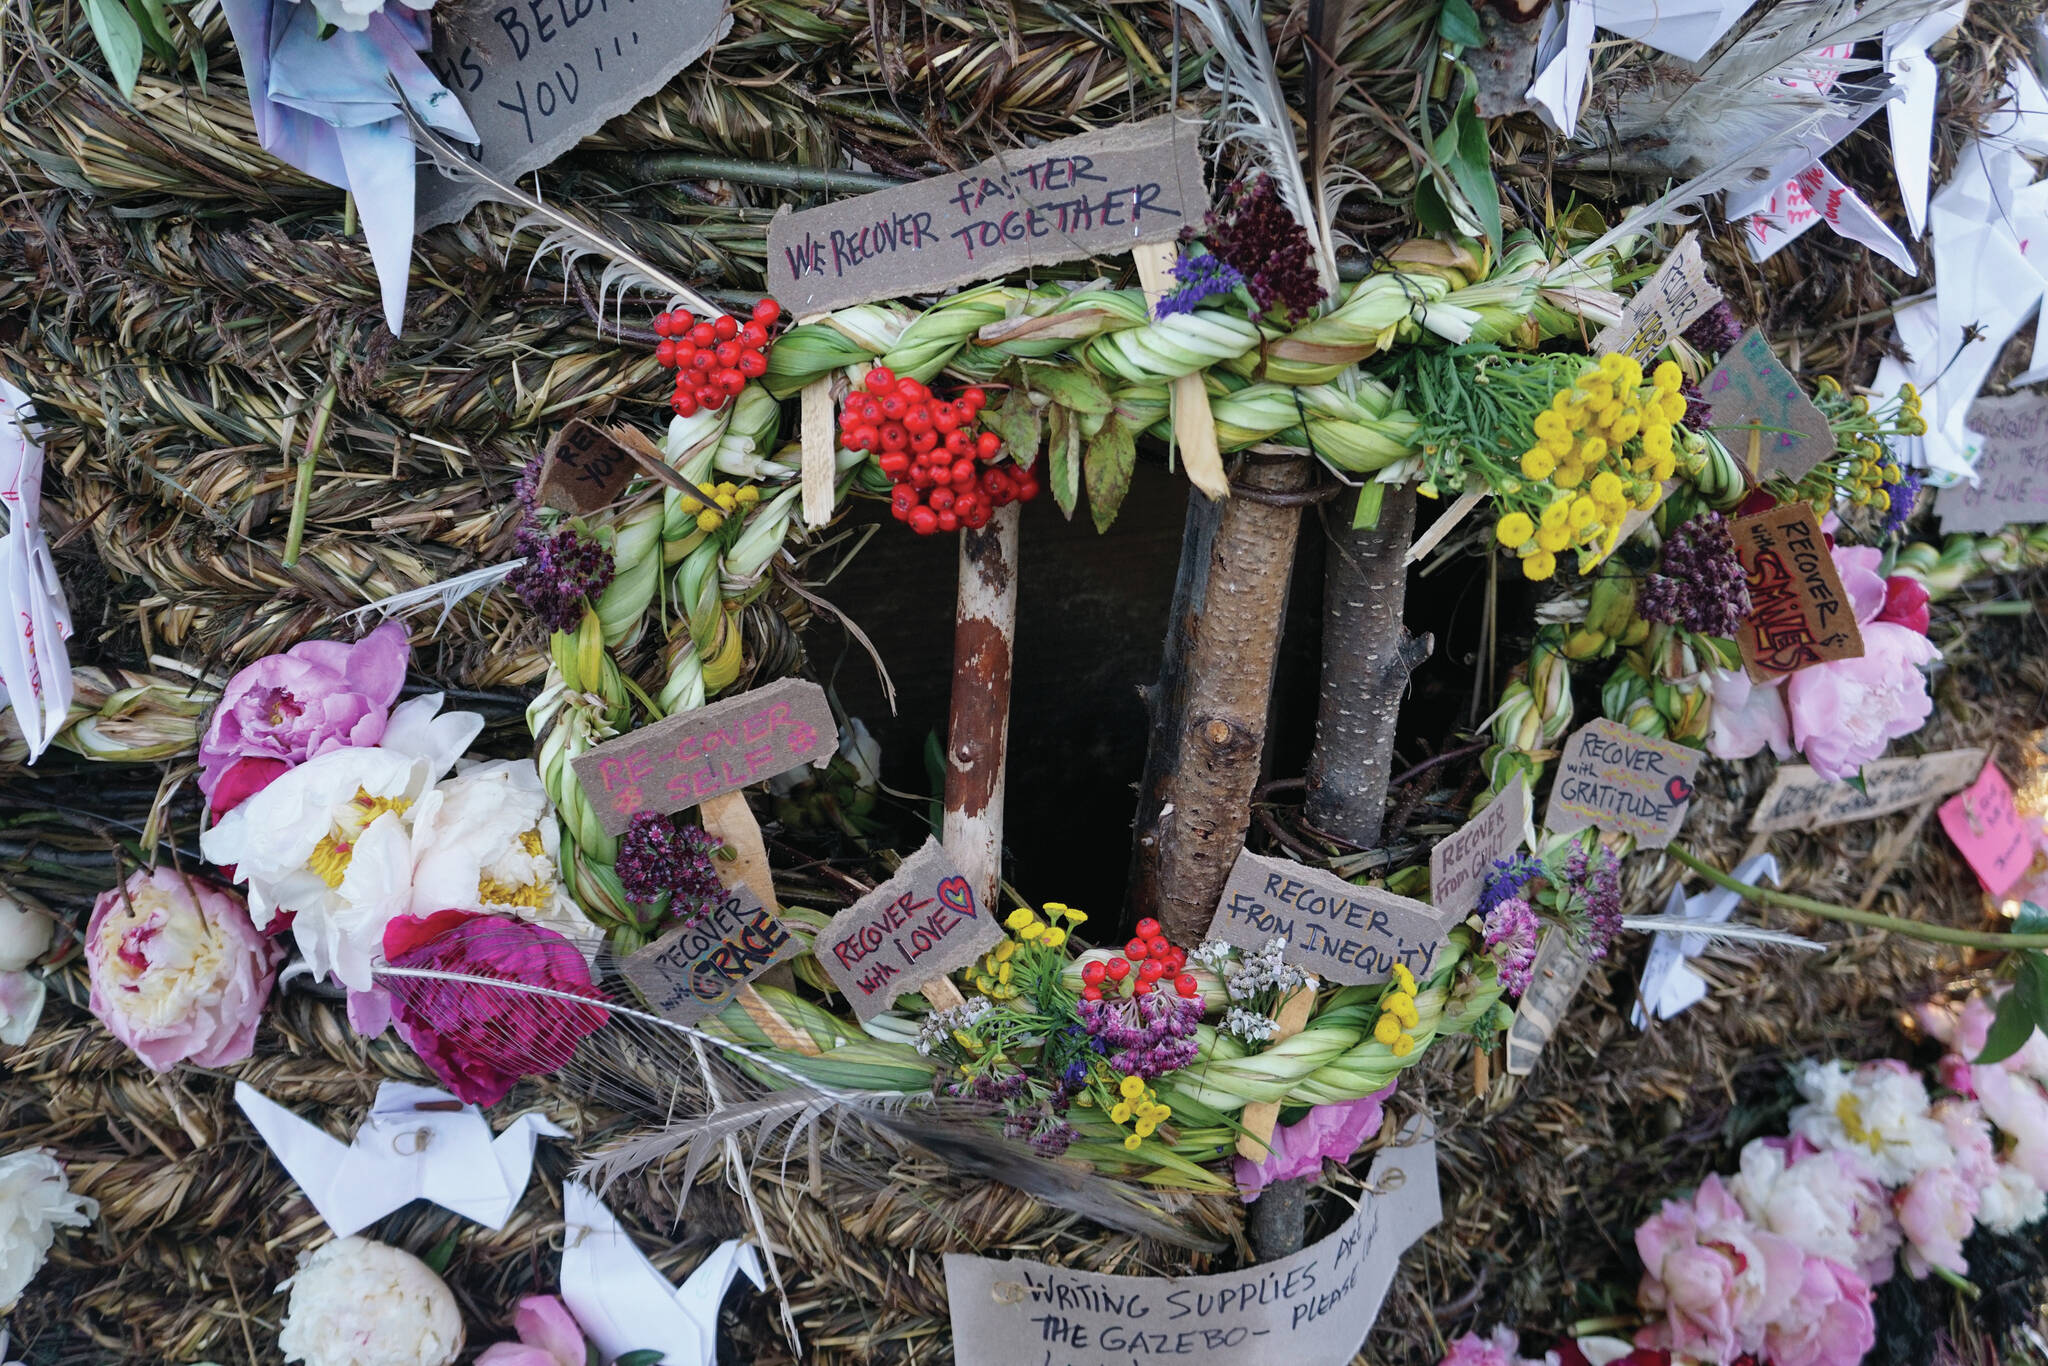 Signs, flowers and origami cranes decorate Recover, the 18th annual Burning Basket, on Sunday, Sept. 12, 2021, at Mariner Park on the Homer Spit in Homer, Alaska. (Photo by Michael Armstrong/Homer News)